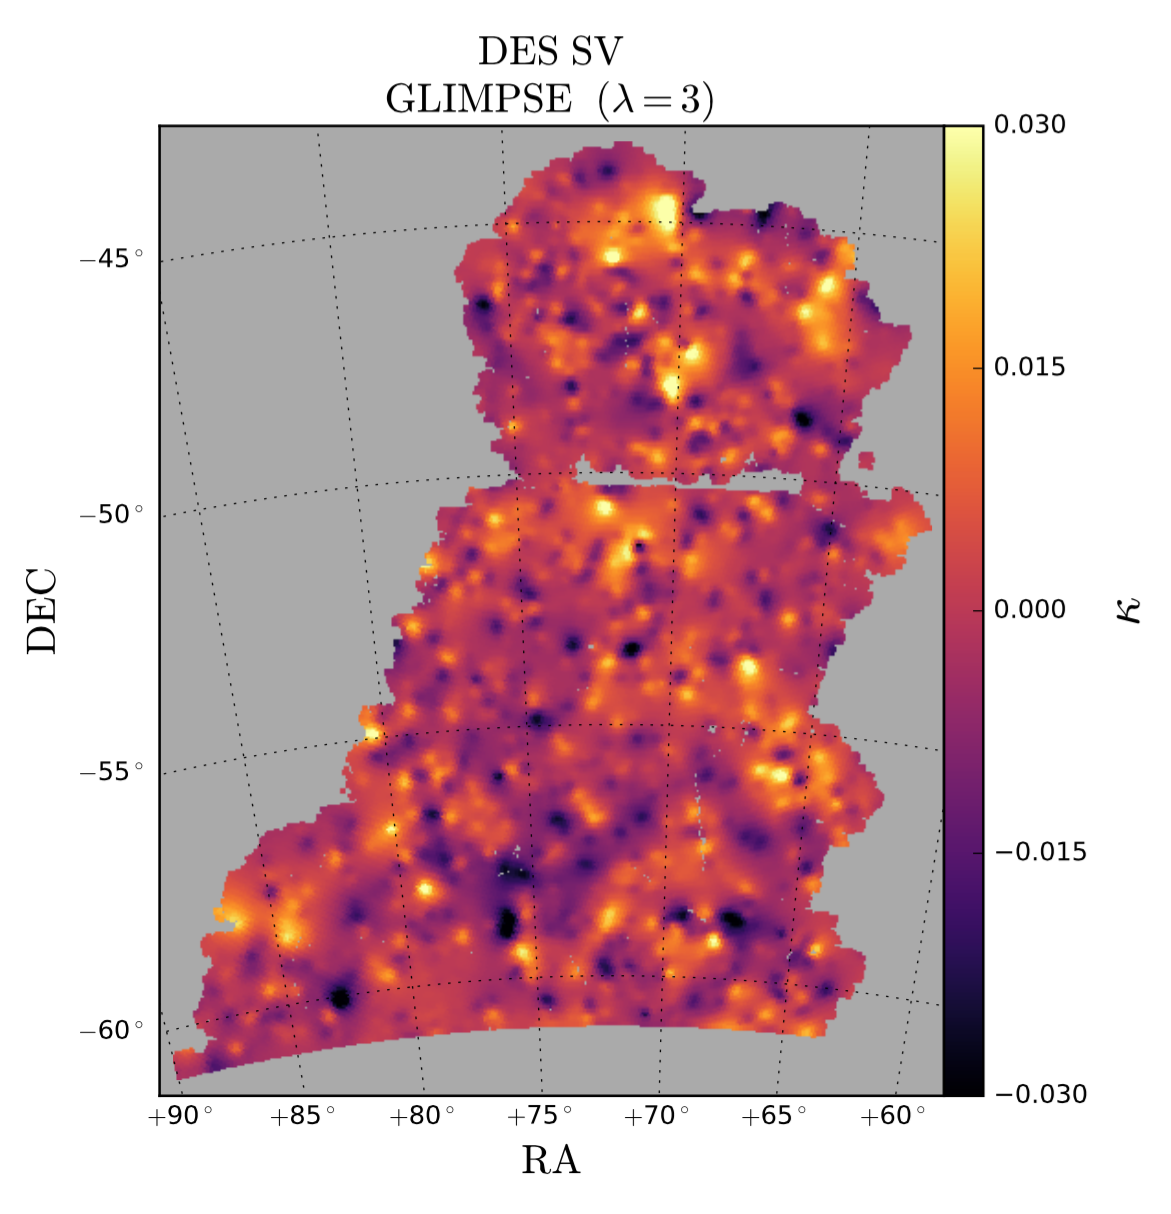 Improving Weak Lensing Mass Map Reconstructions using Gaussian and Sparsity Priors: Application to DES SV